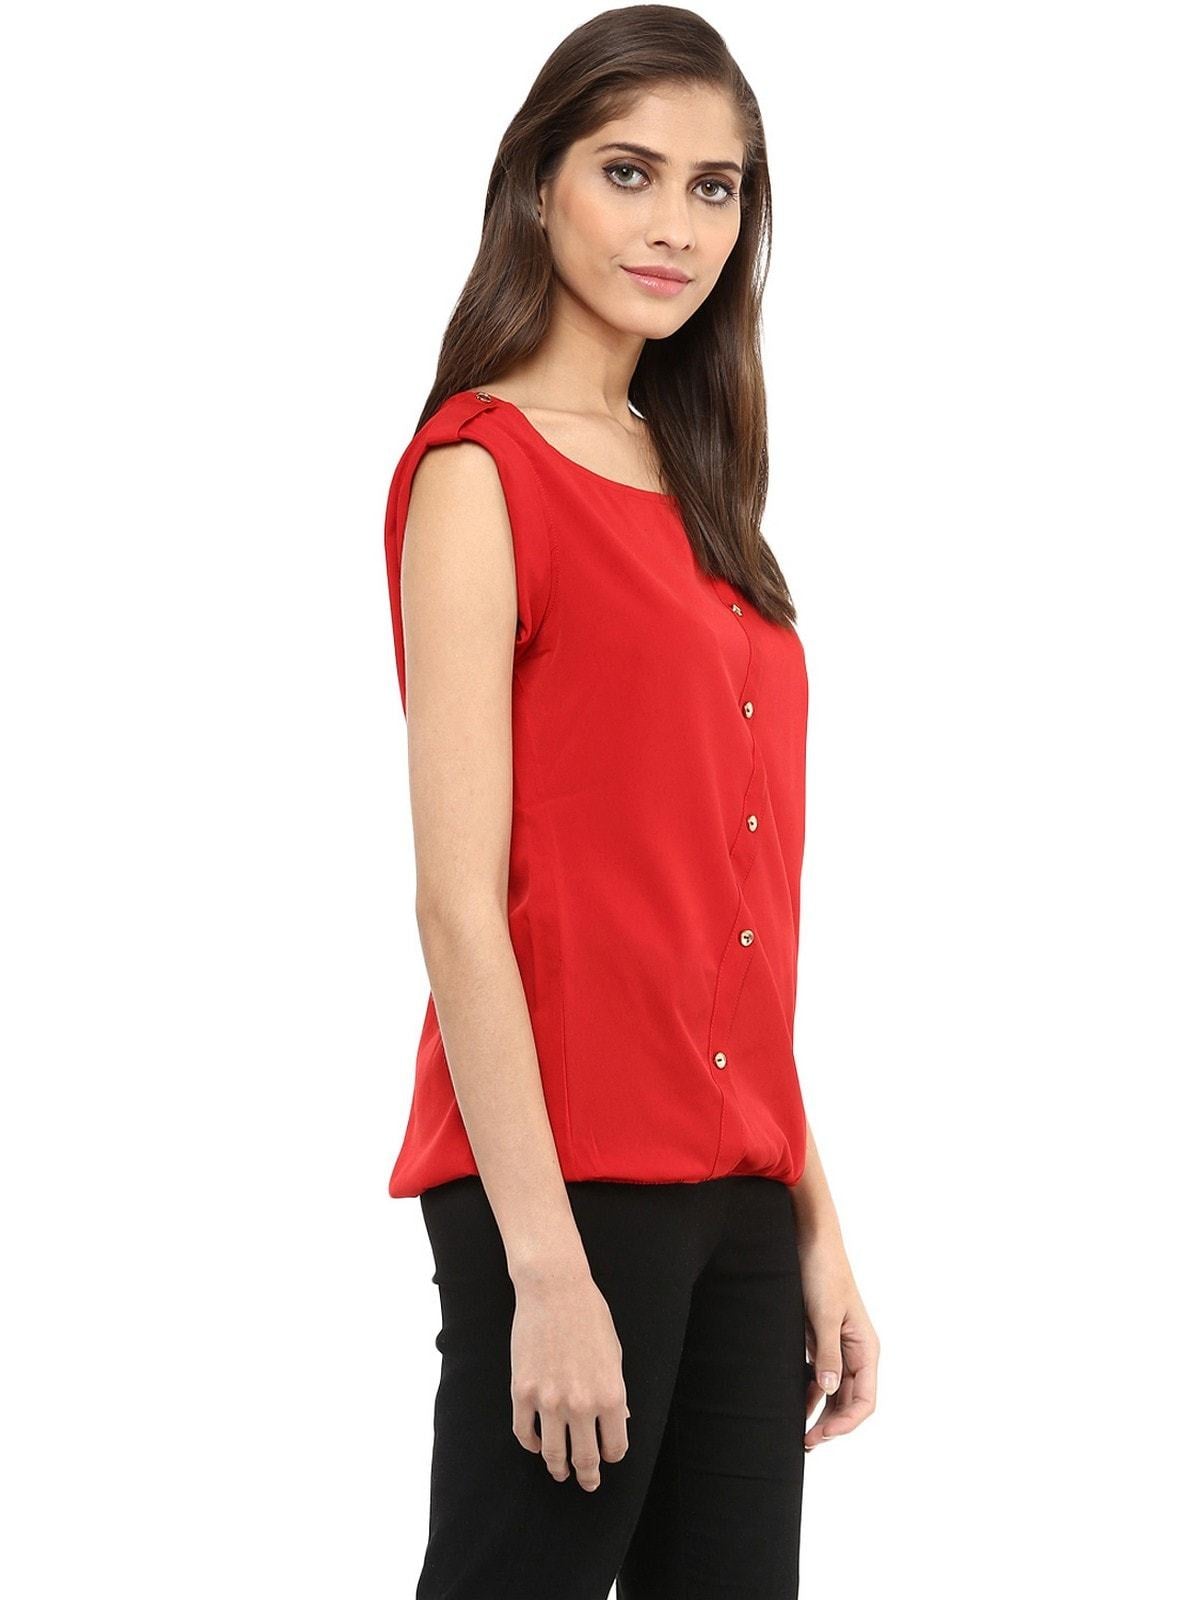 Women's Red Top With Fake Shoulder-Tab - Pannkh